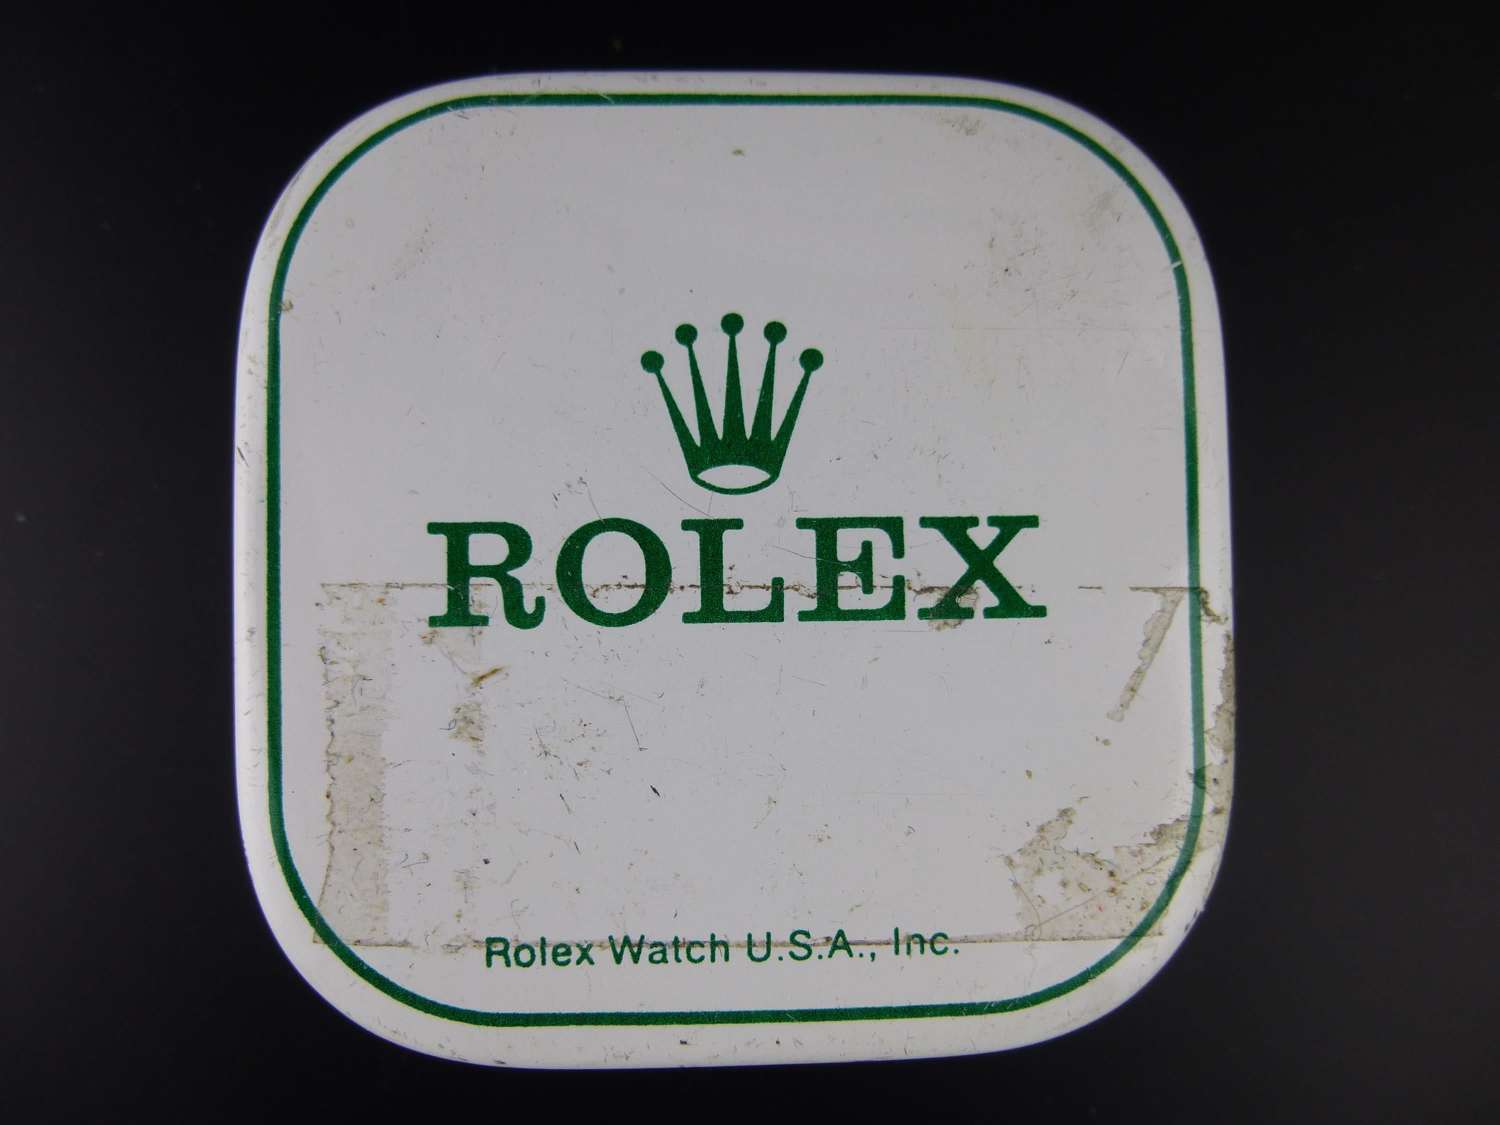 Genuine ROLEX tin for parts and movements c.1960-70